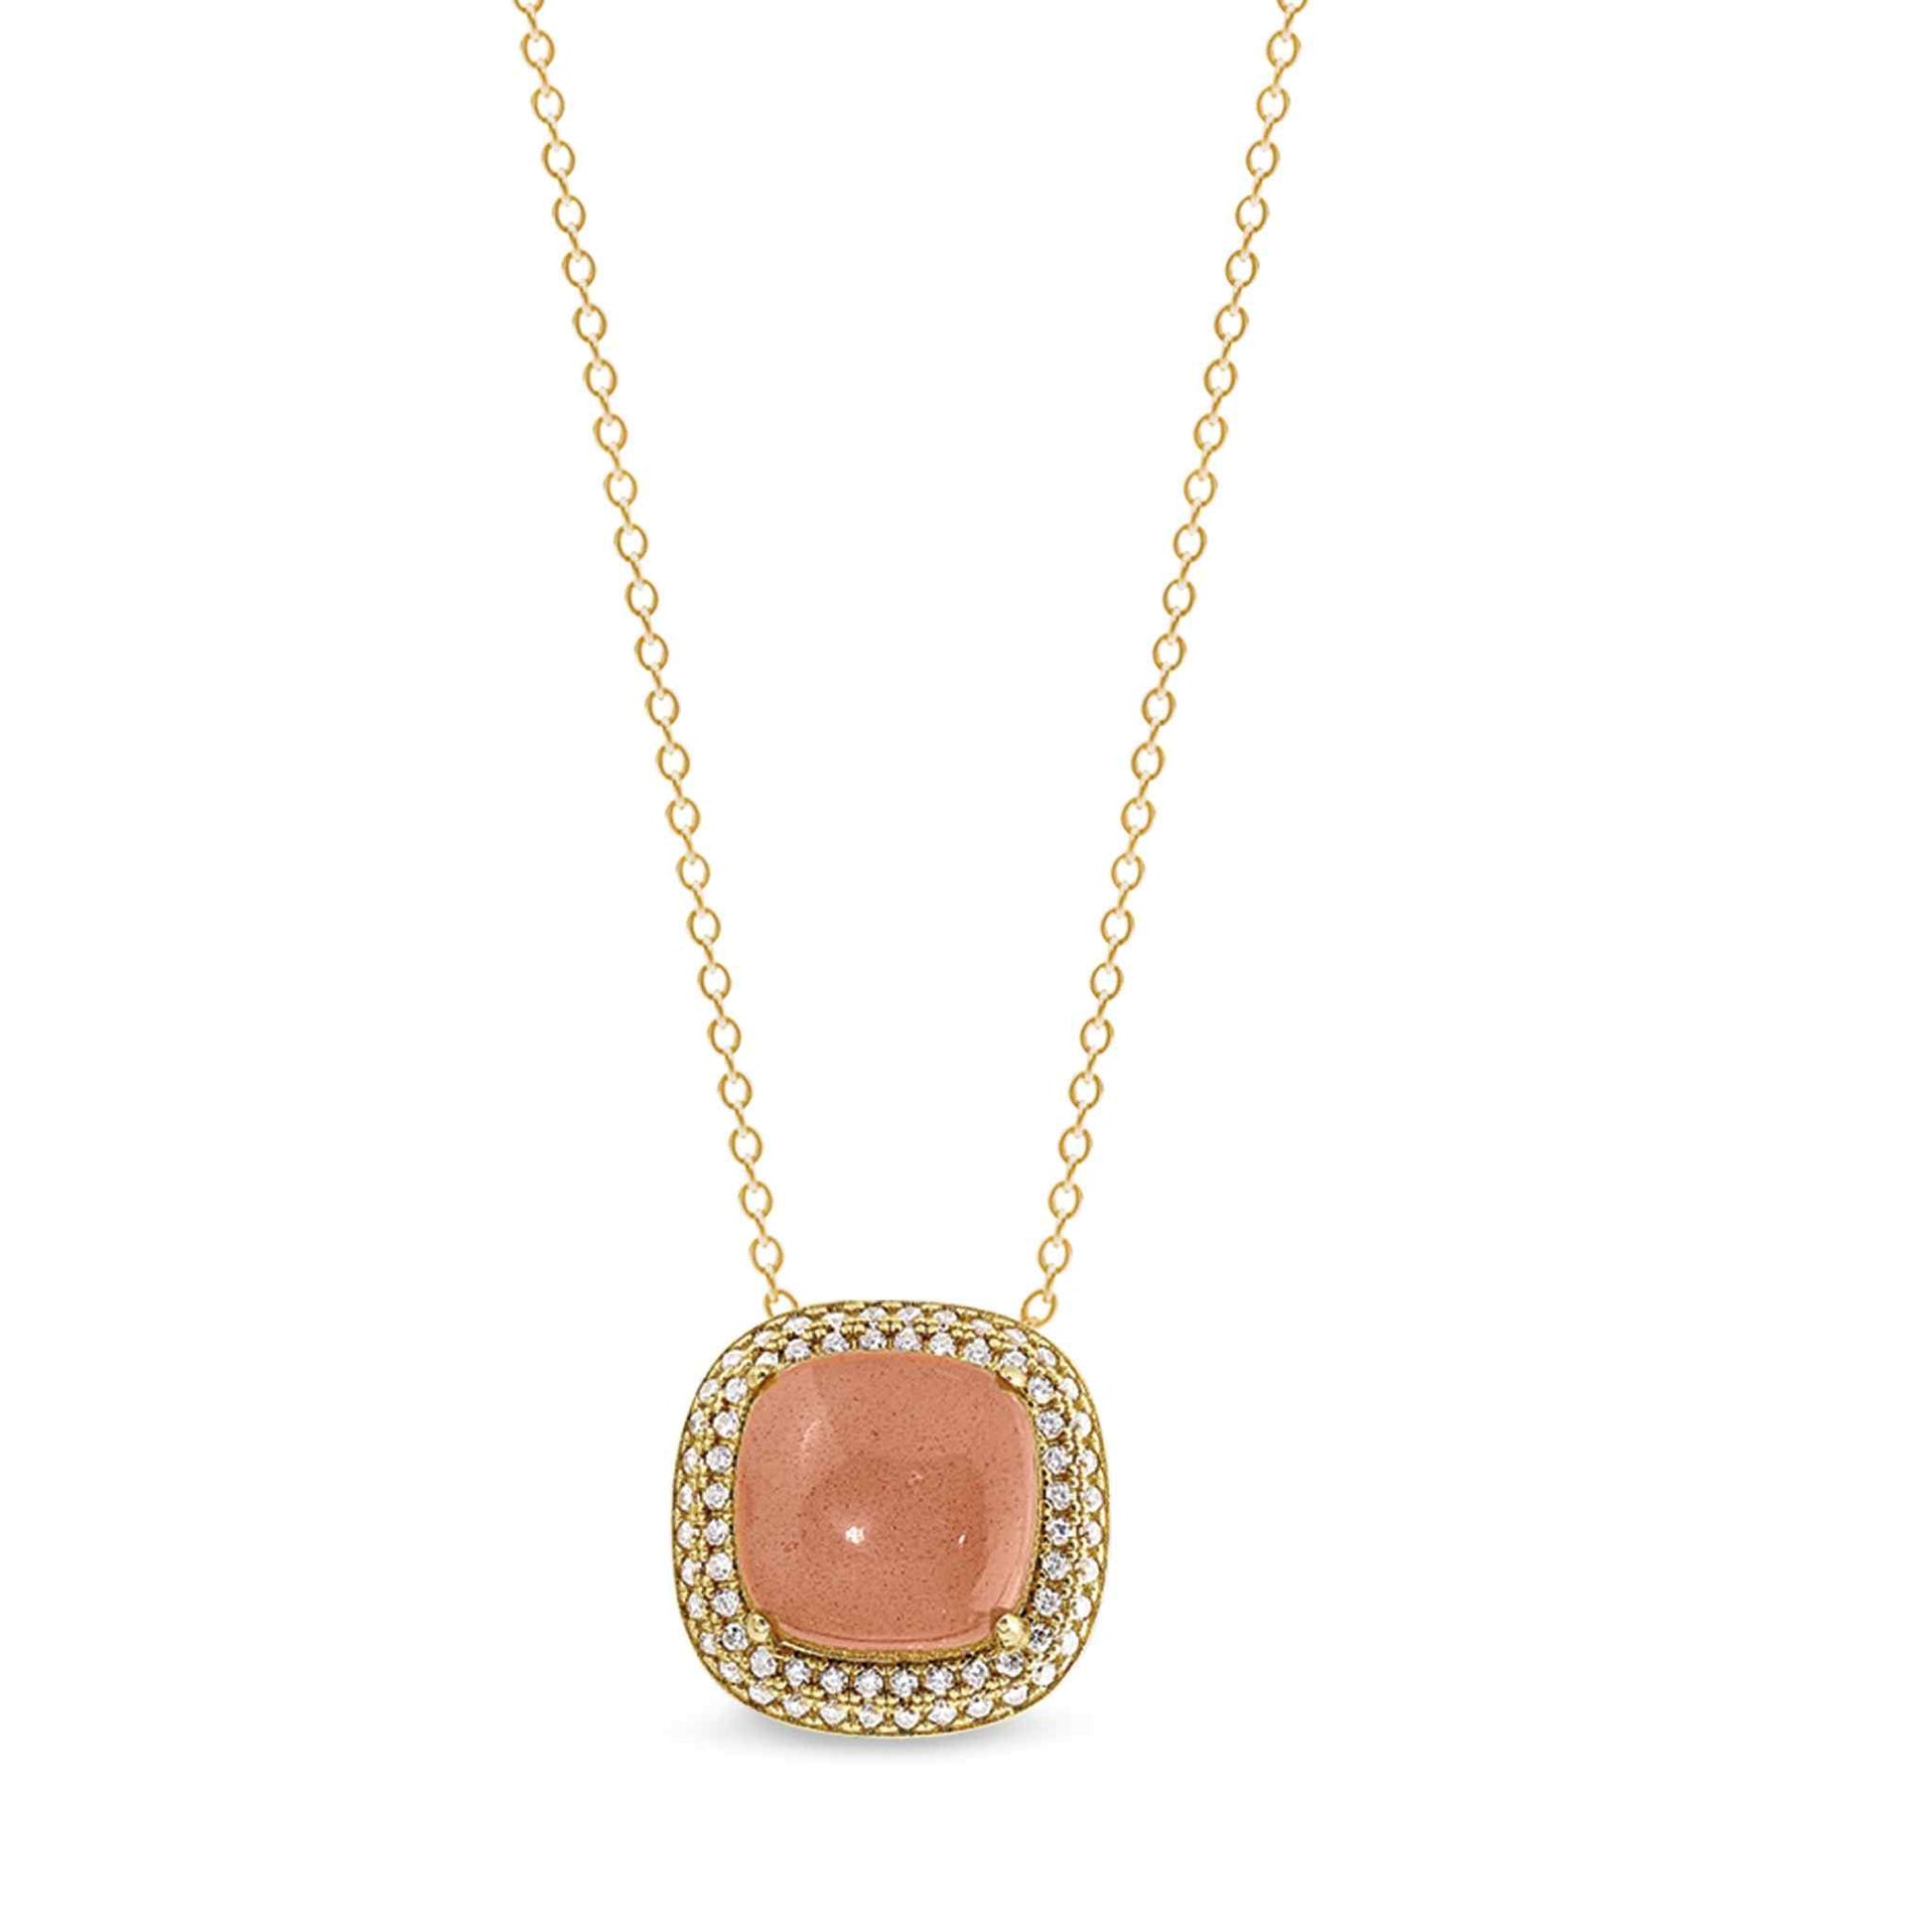 A sterling silver peach quartz pendant with simulated diamonds displayed on a neutral white background.